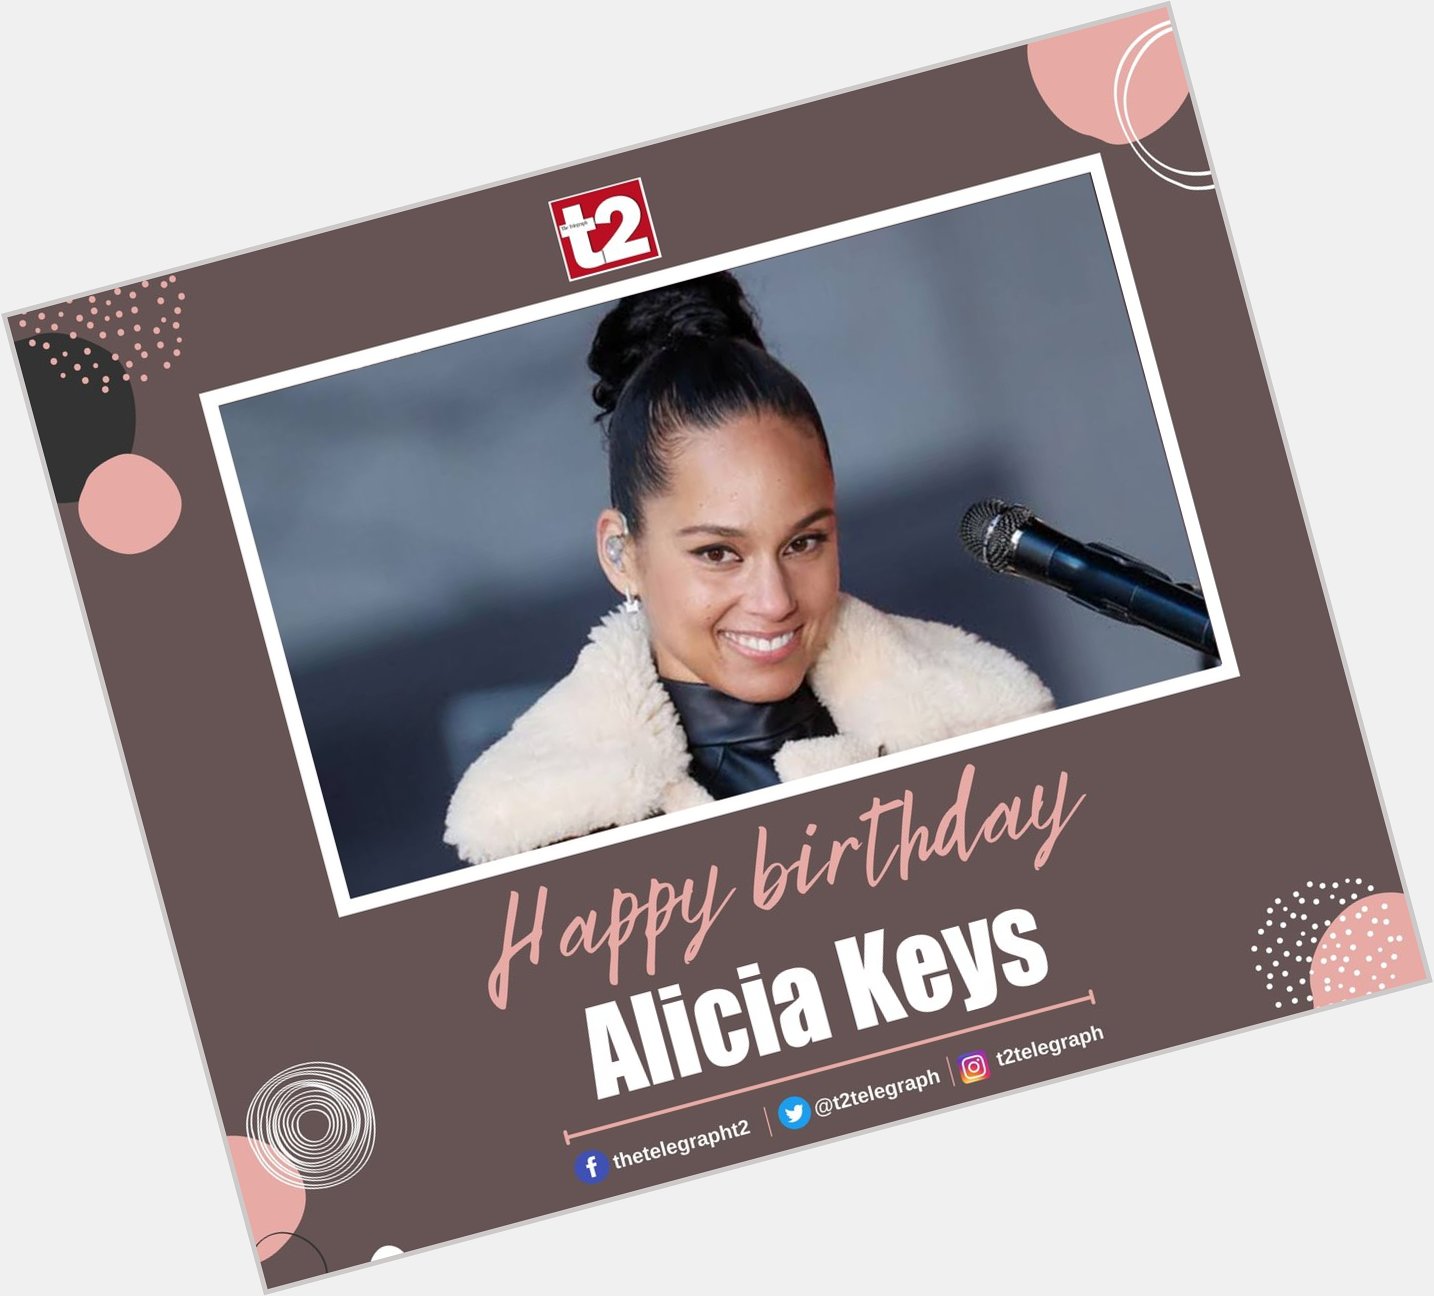 Happy birthday Alicia Keys. Your music strikes a fine balance between fragile and fiery notes. 